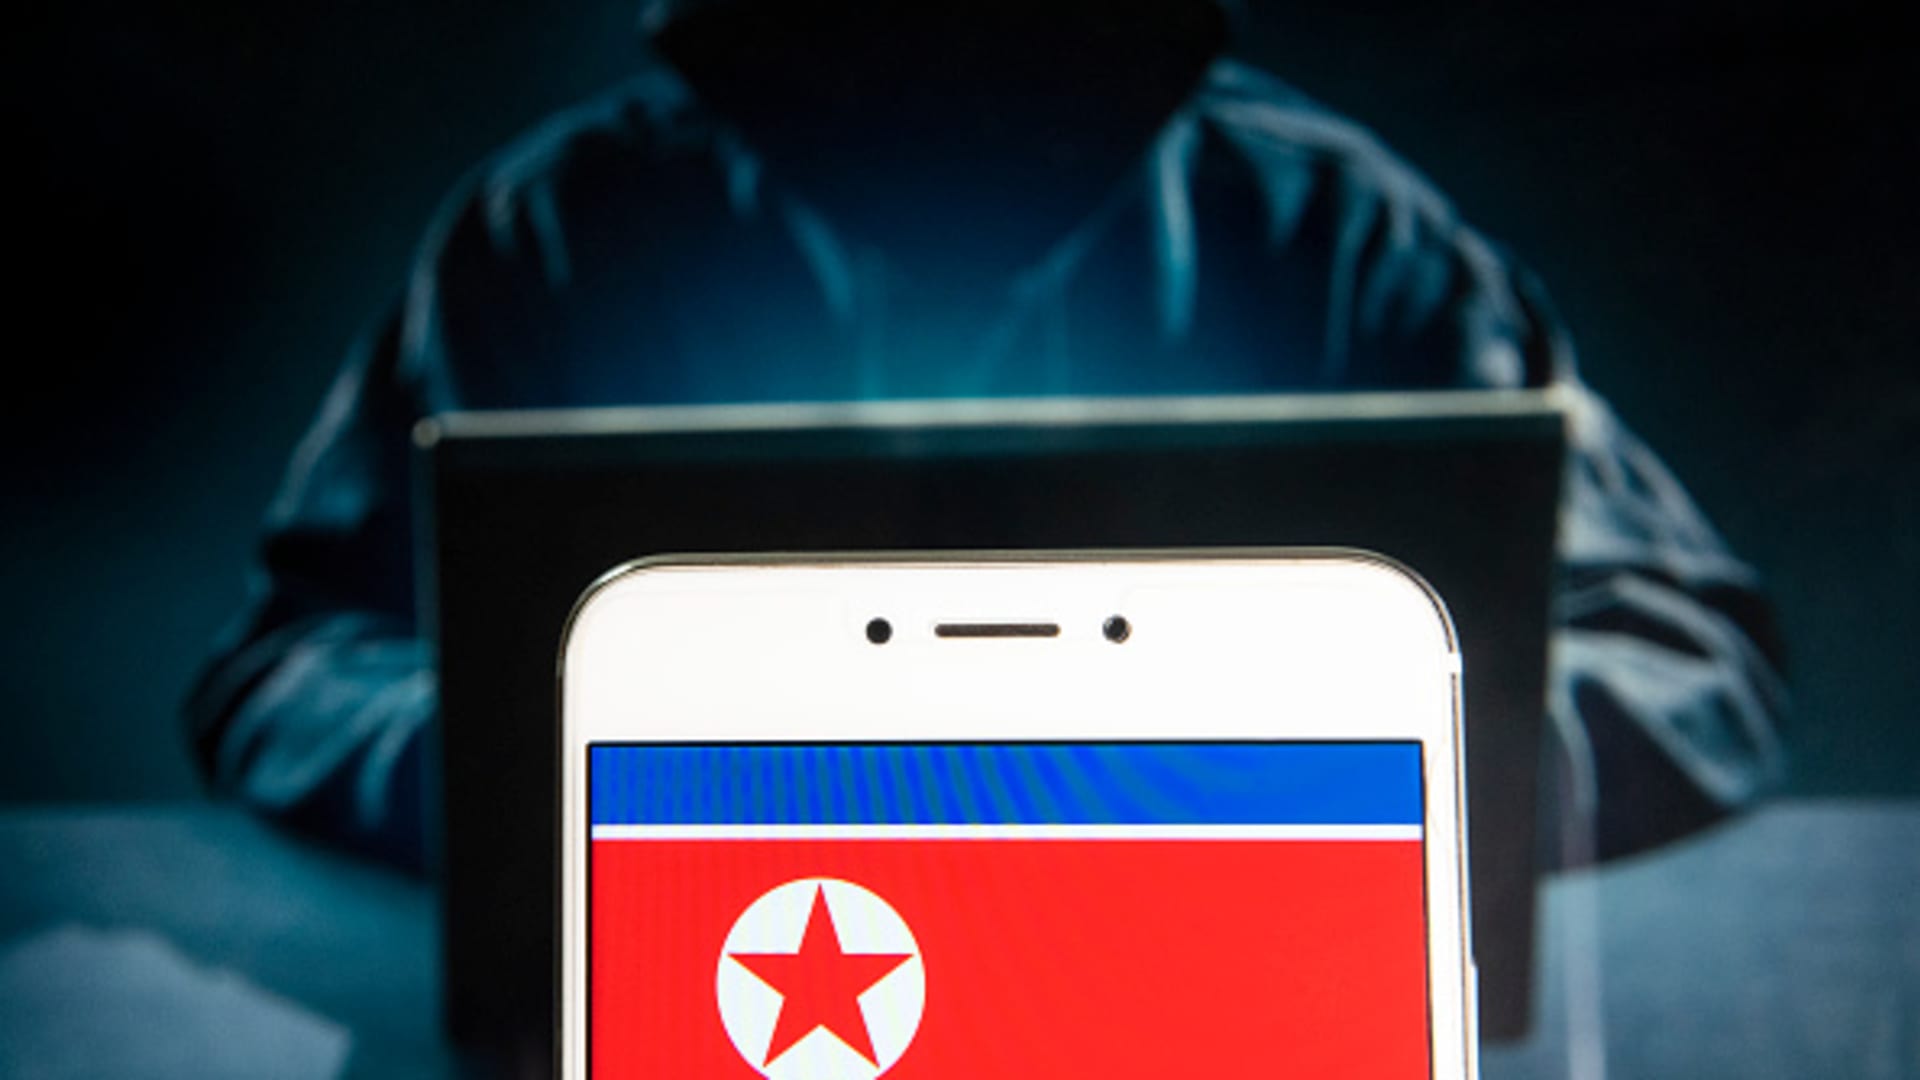 North Korea is likely culprit behind $100 million crypto heist, researchers say